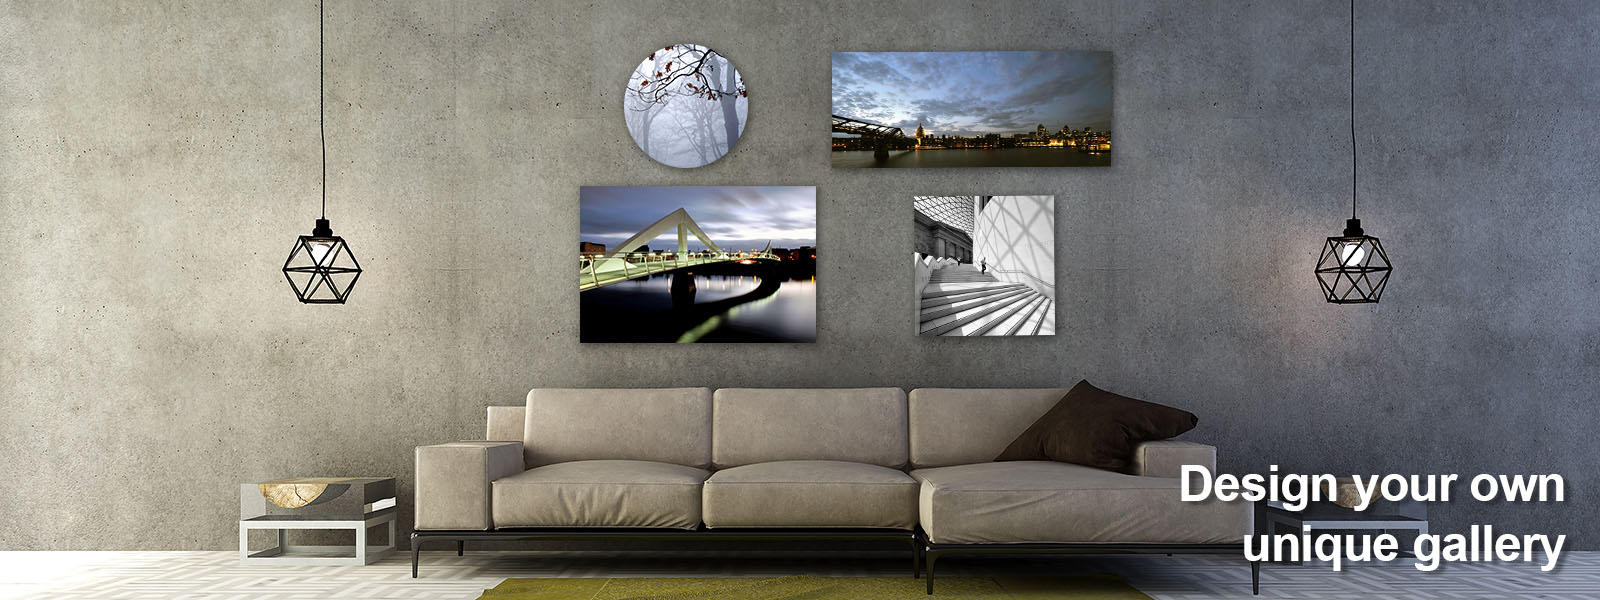 Design Your Own Bespoke Gallery images on wall